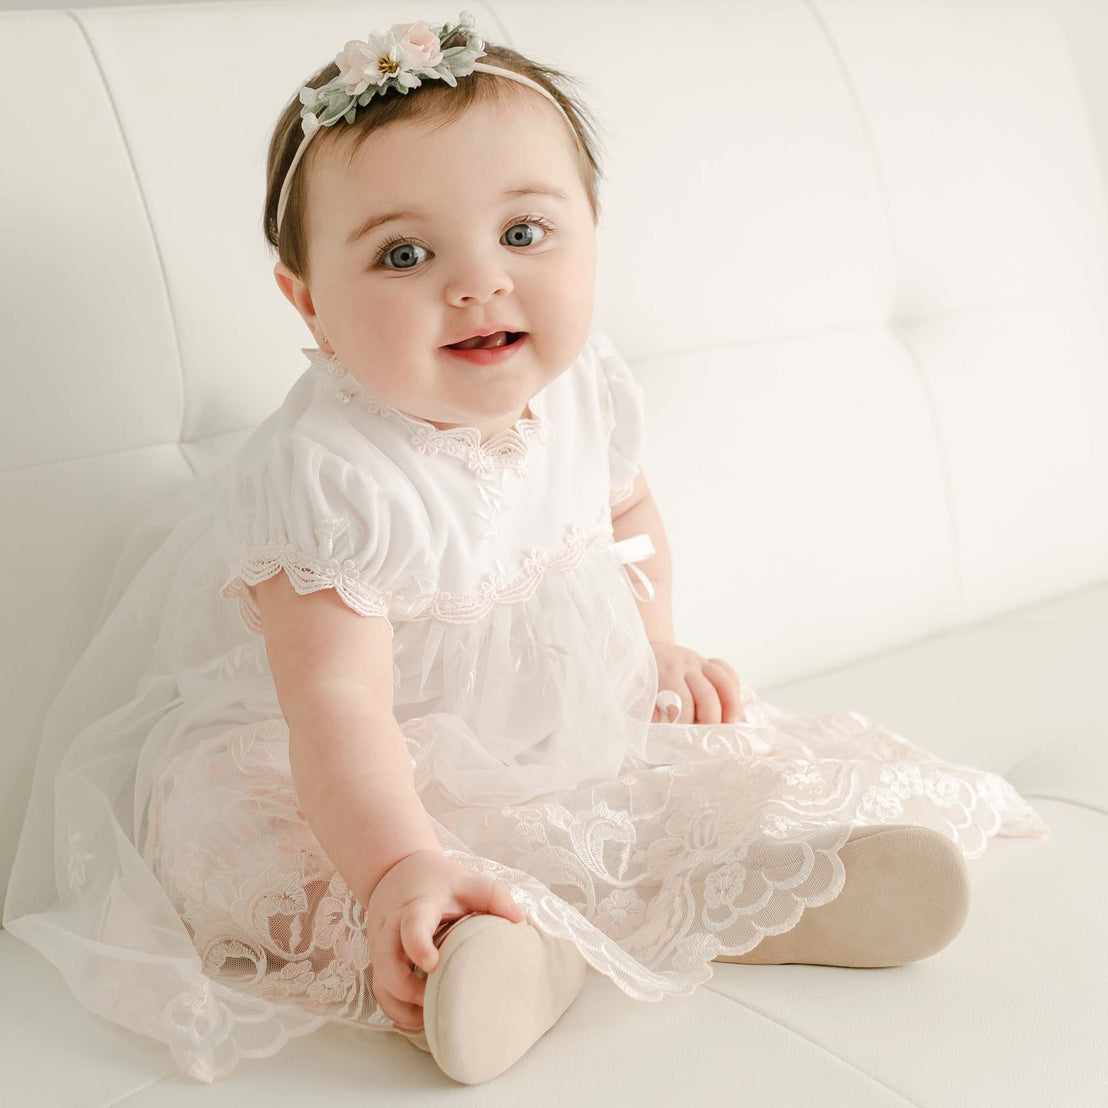 A baby girl in a Joli Romper Dress and headband with floral detail sits smiling on an upscale white sofa, looking directly at the camera.